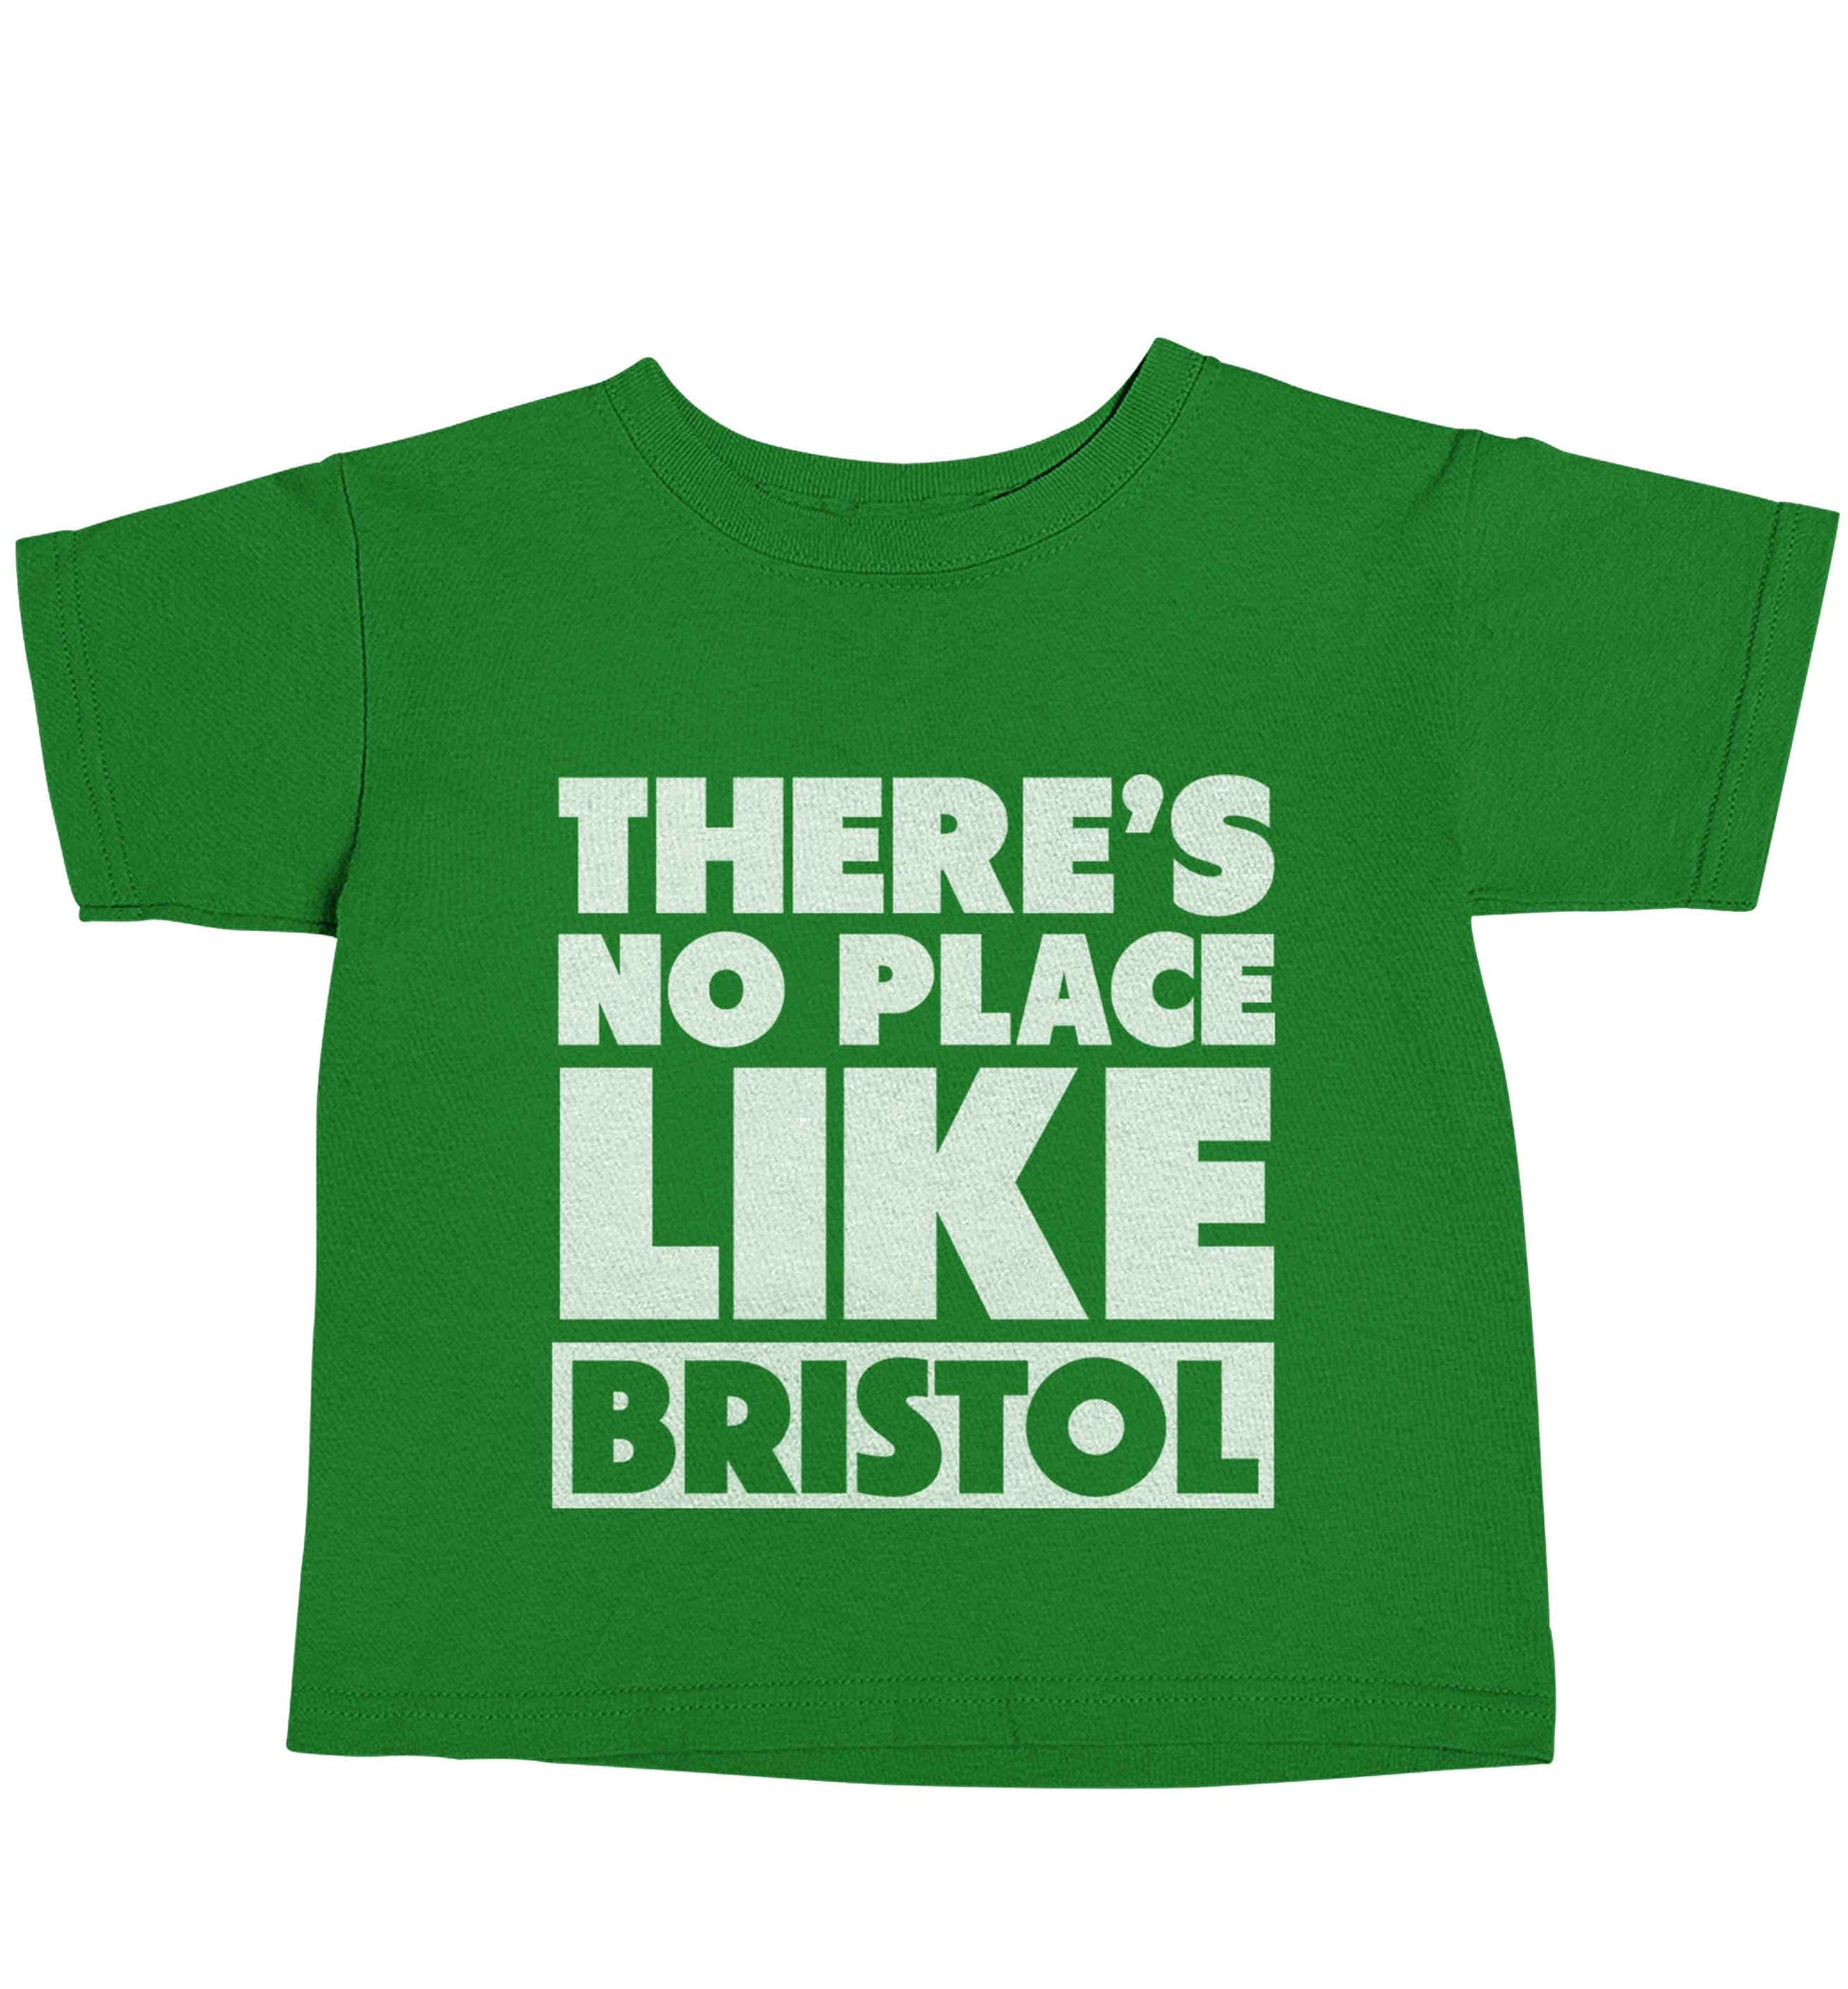 There's no place like Bristol green baby toddler Tshirt 2 Years